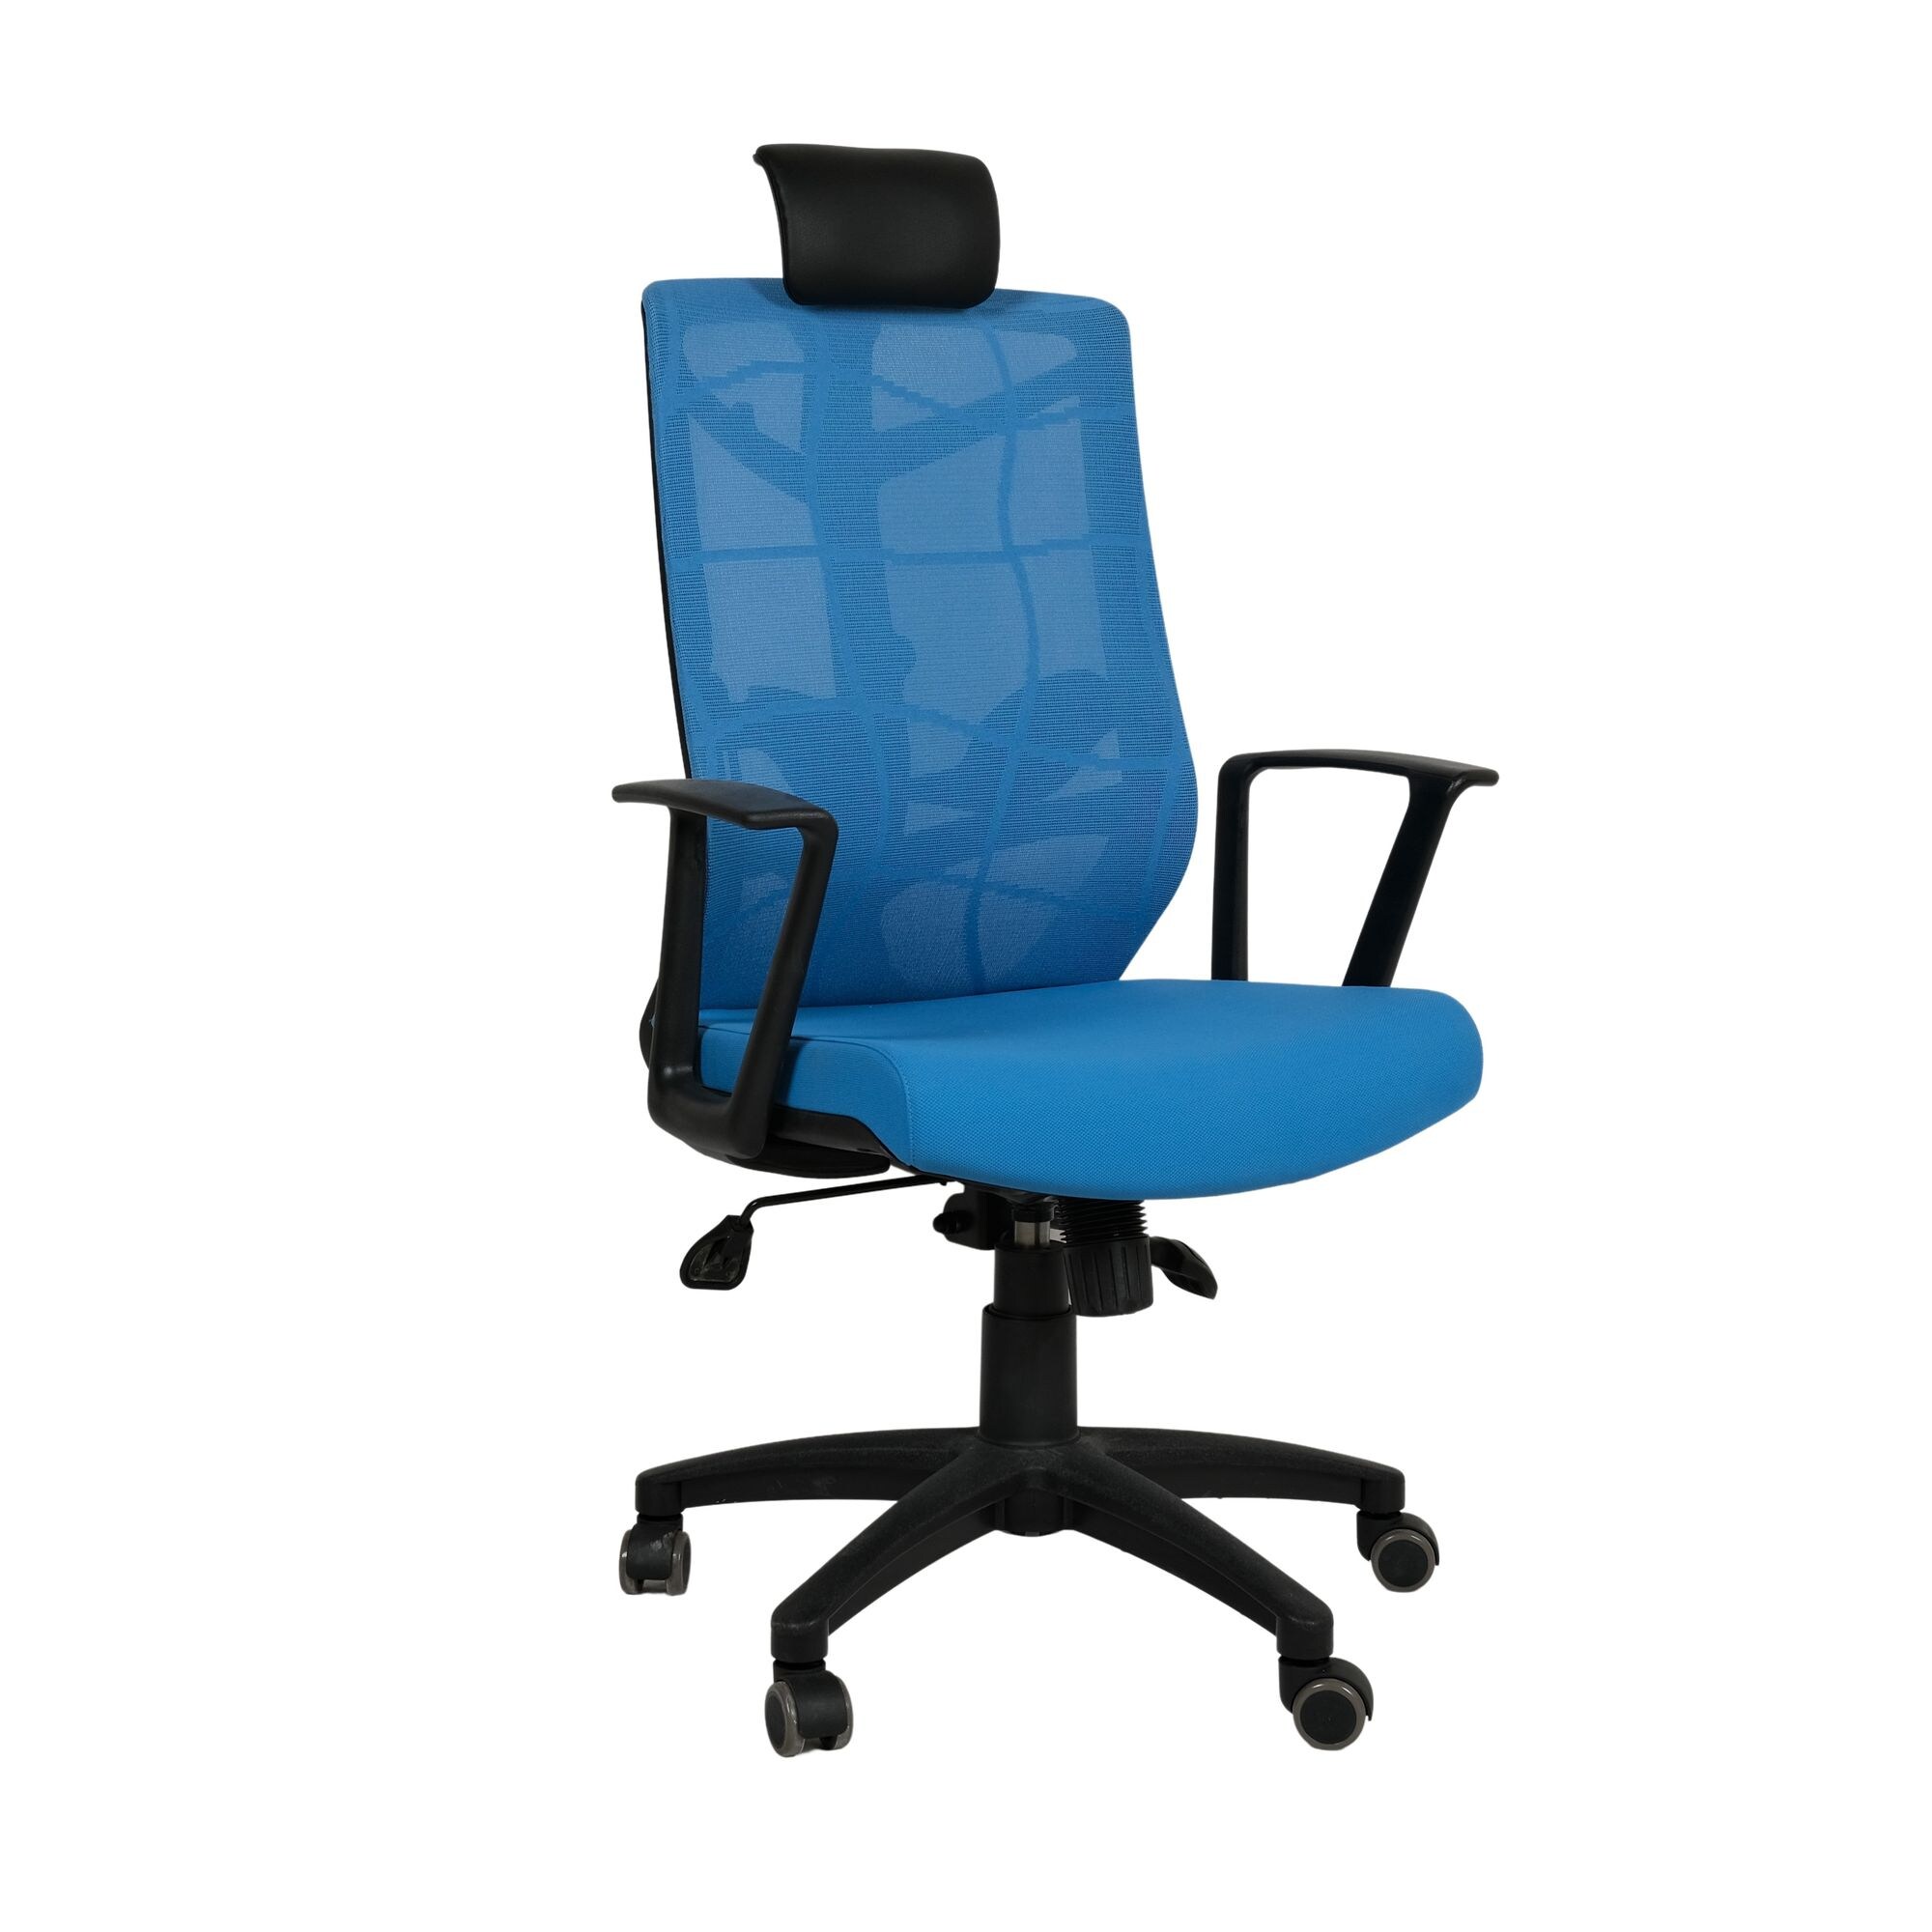 Exotic Chairs Moveable Highback Executive Chair with Cushion, Blue & Black